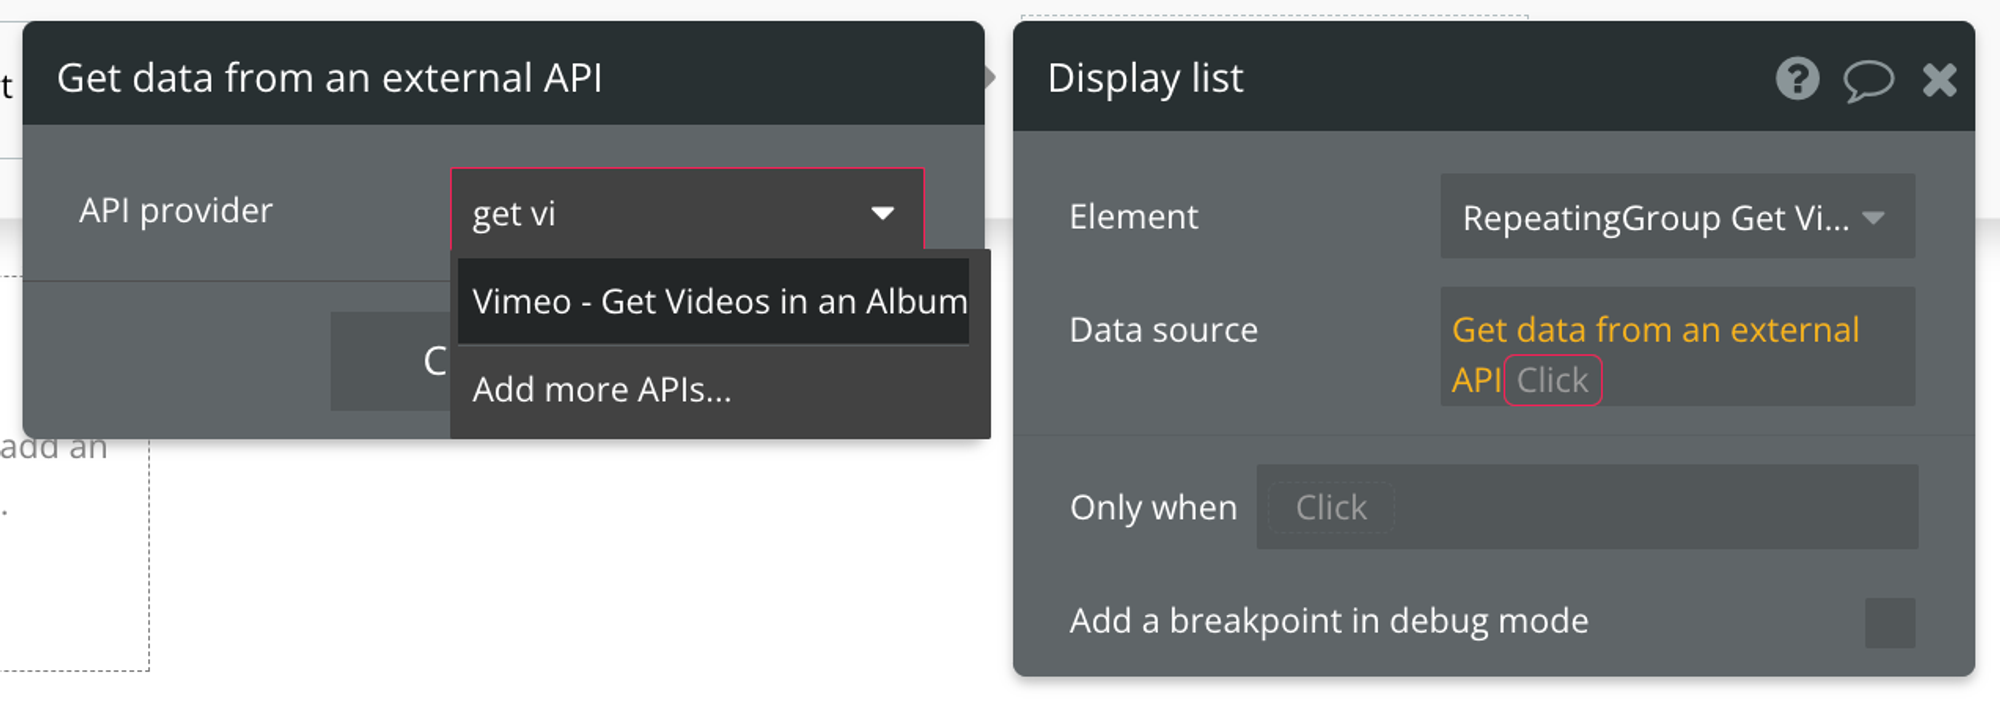 Select "Get data from external API" from the list of data sources, then find Vimeo - Get Videos in an Album from the list of API providers